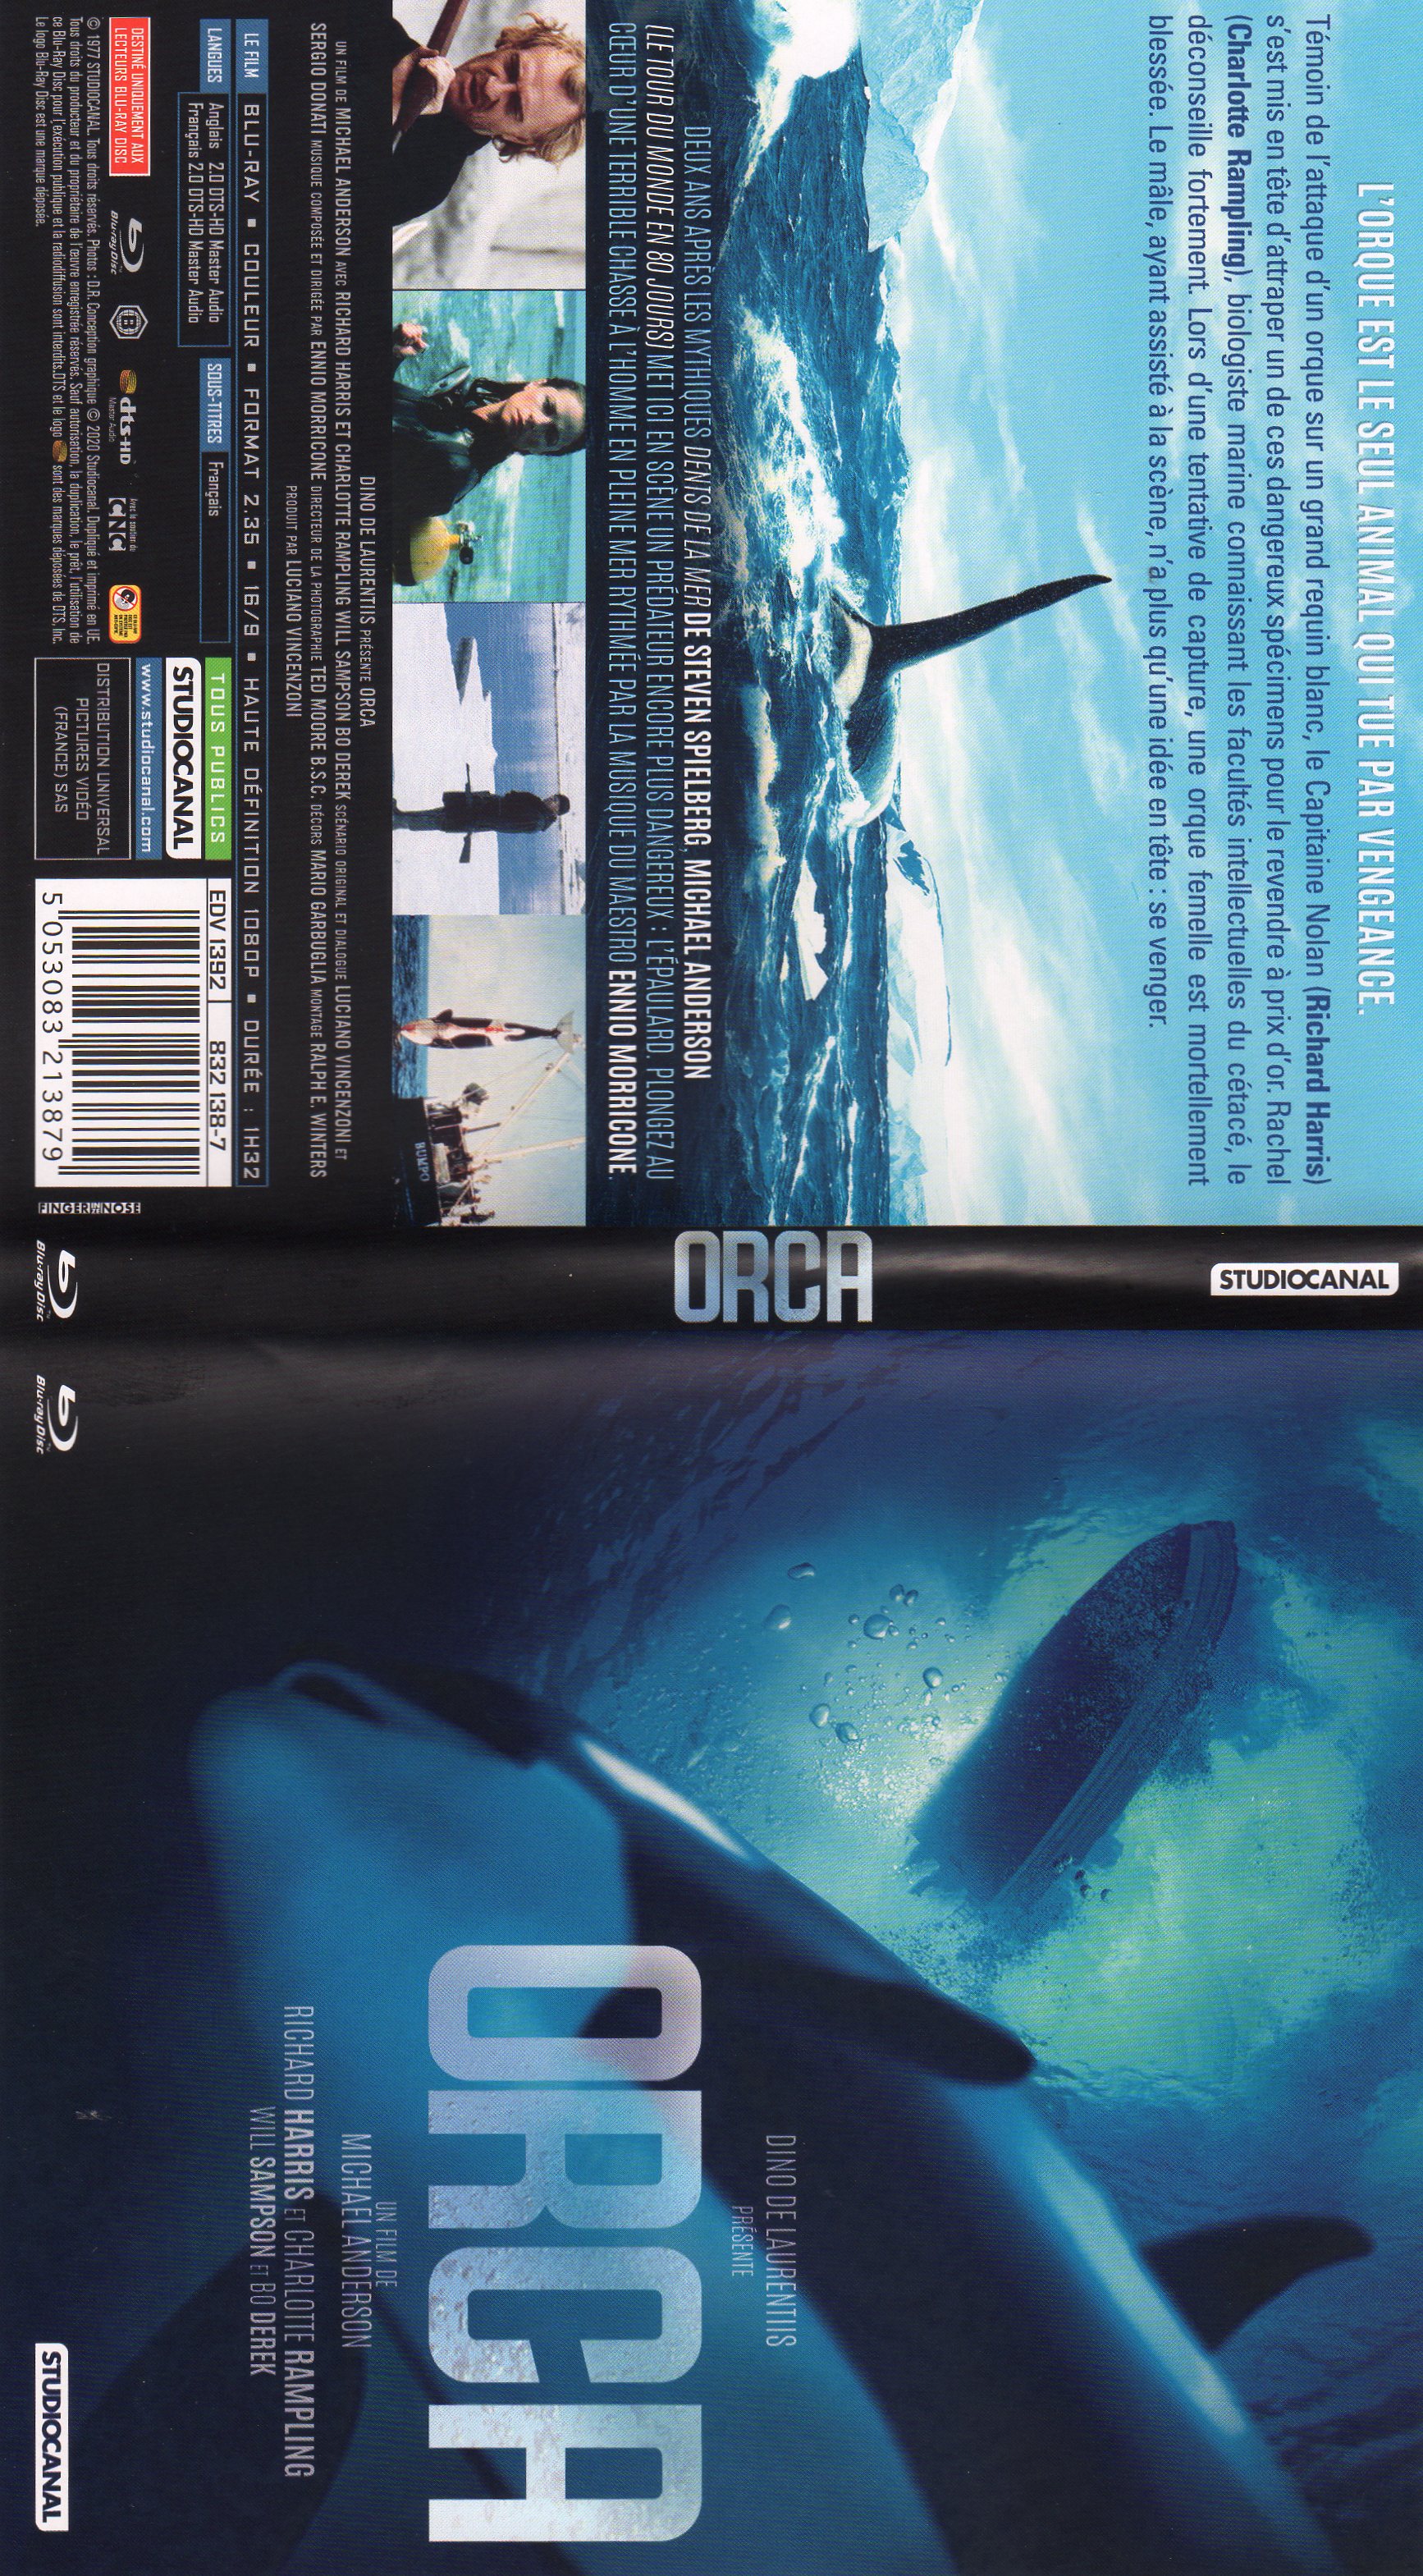 Jaquette DVD Orca (BLU-RAY)